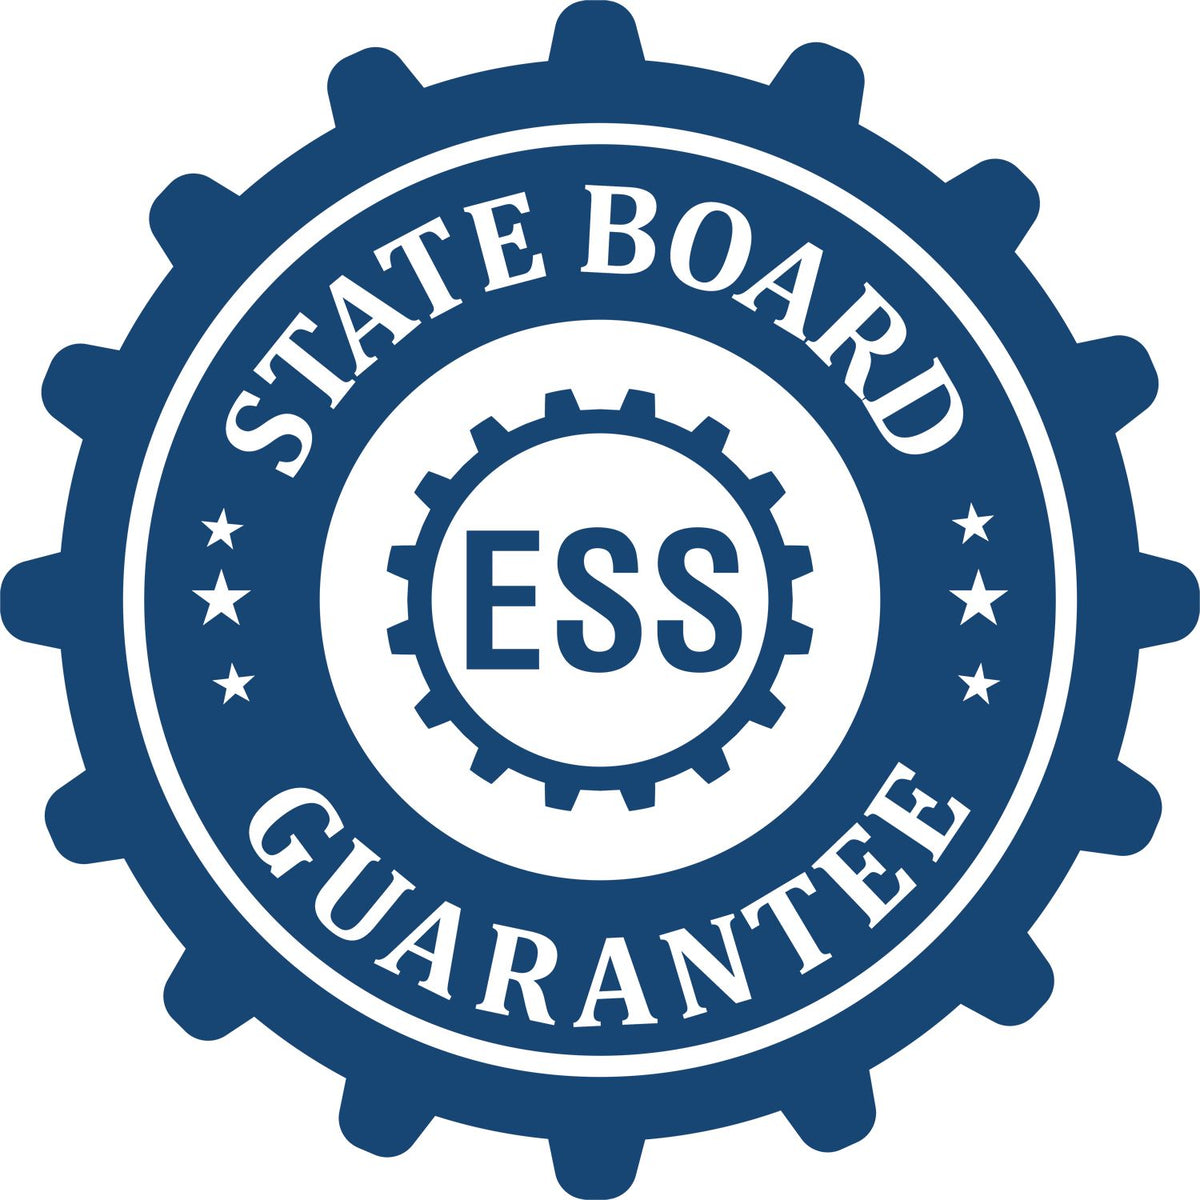 An emblem in a gear shape illustrating a state board guarantee for the Soft South Carolina Professional Engineer Seal product.